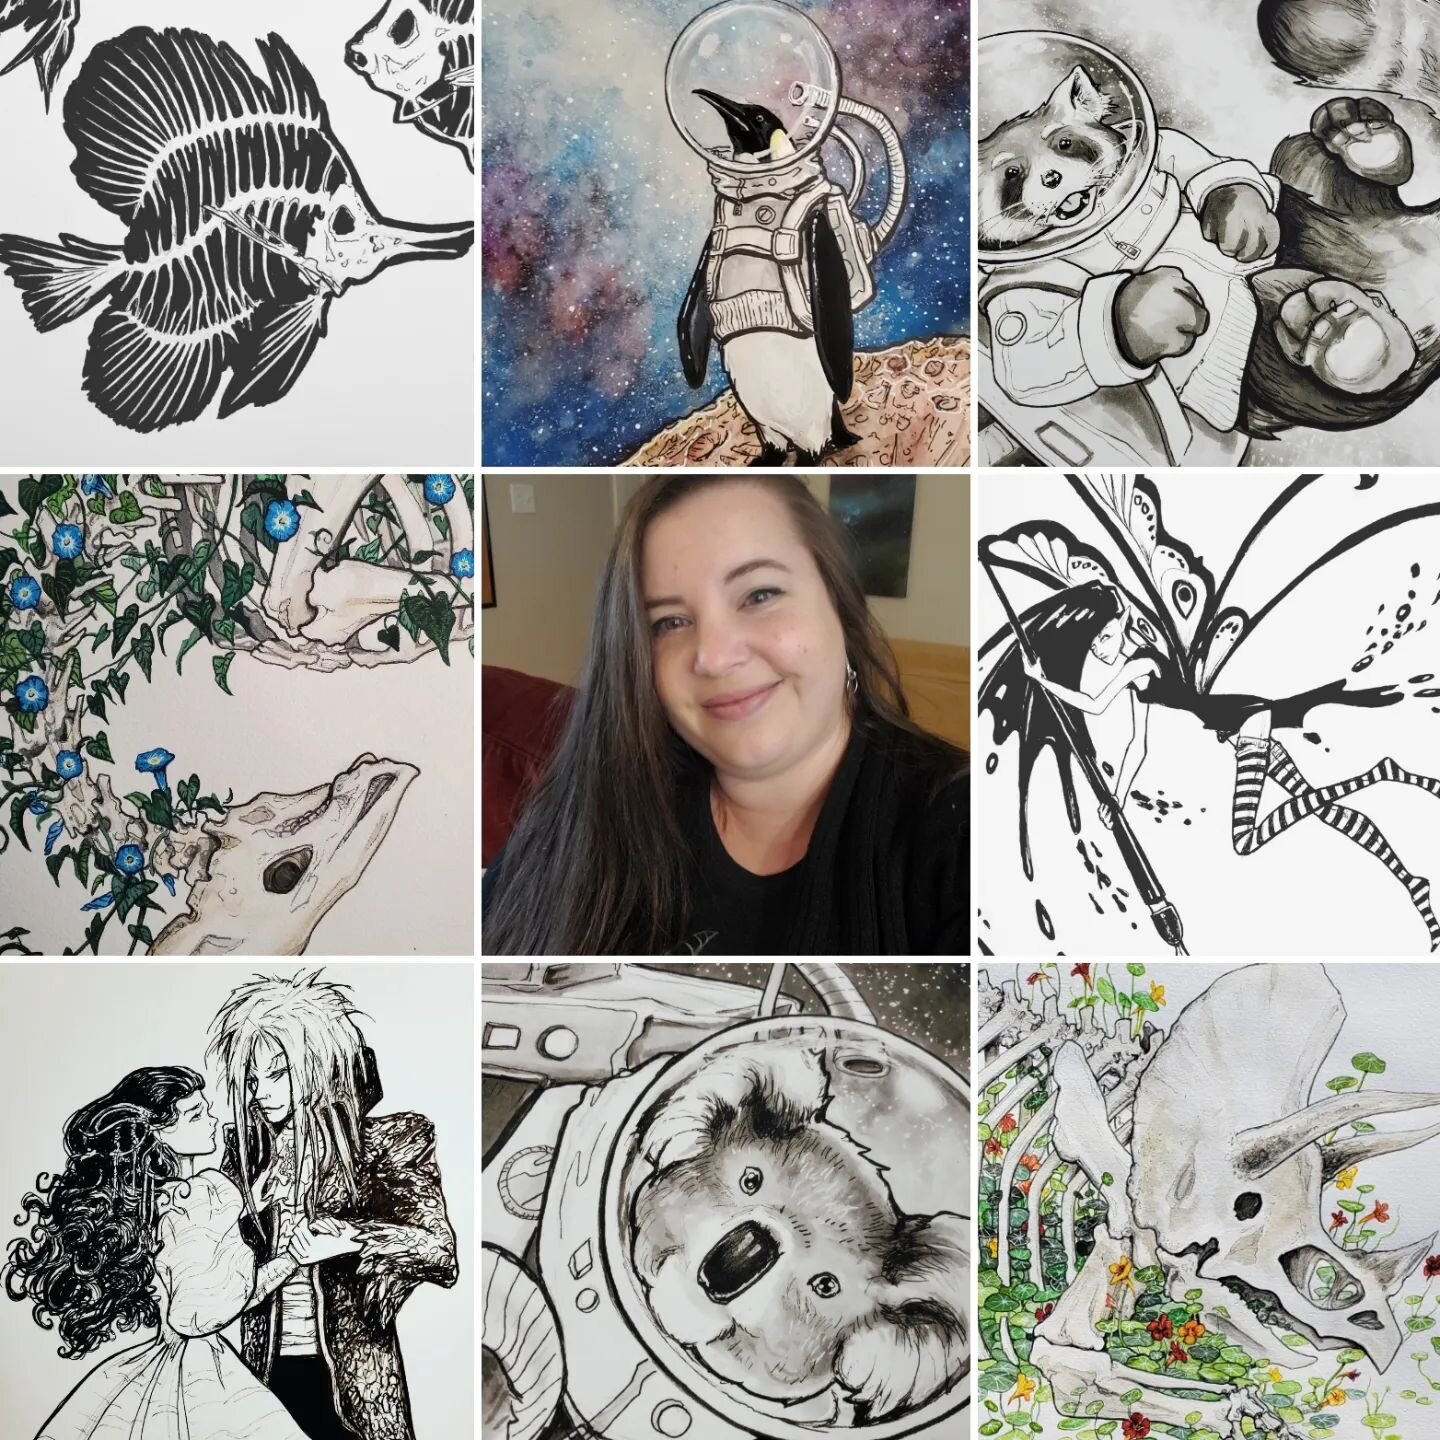 My #artvsartist for 2022. I have some good art goals set for next year. Unfortunately this year I was so busy with other things that I did not make as much art as I wanted to. It is a priority for 2023. Happy New Year!

#happynewyear2023 #artvsartist